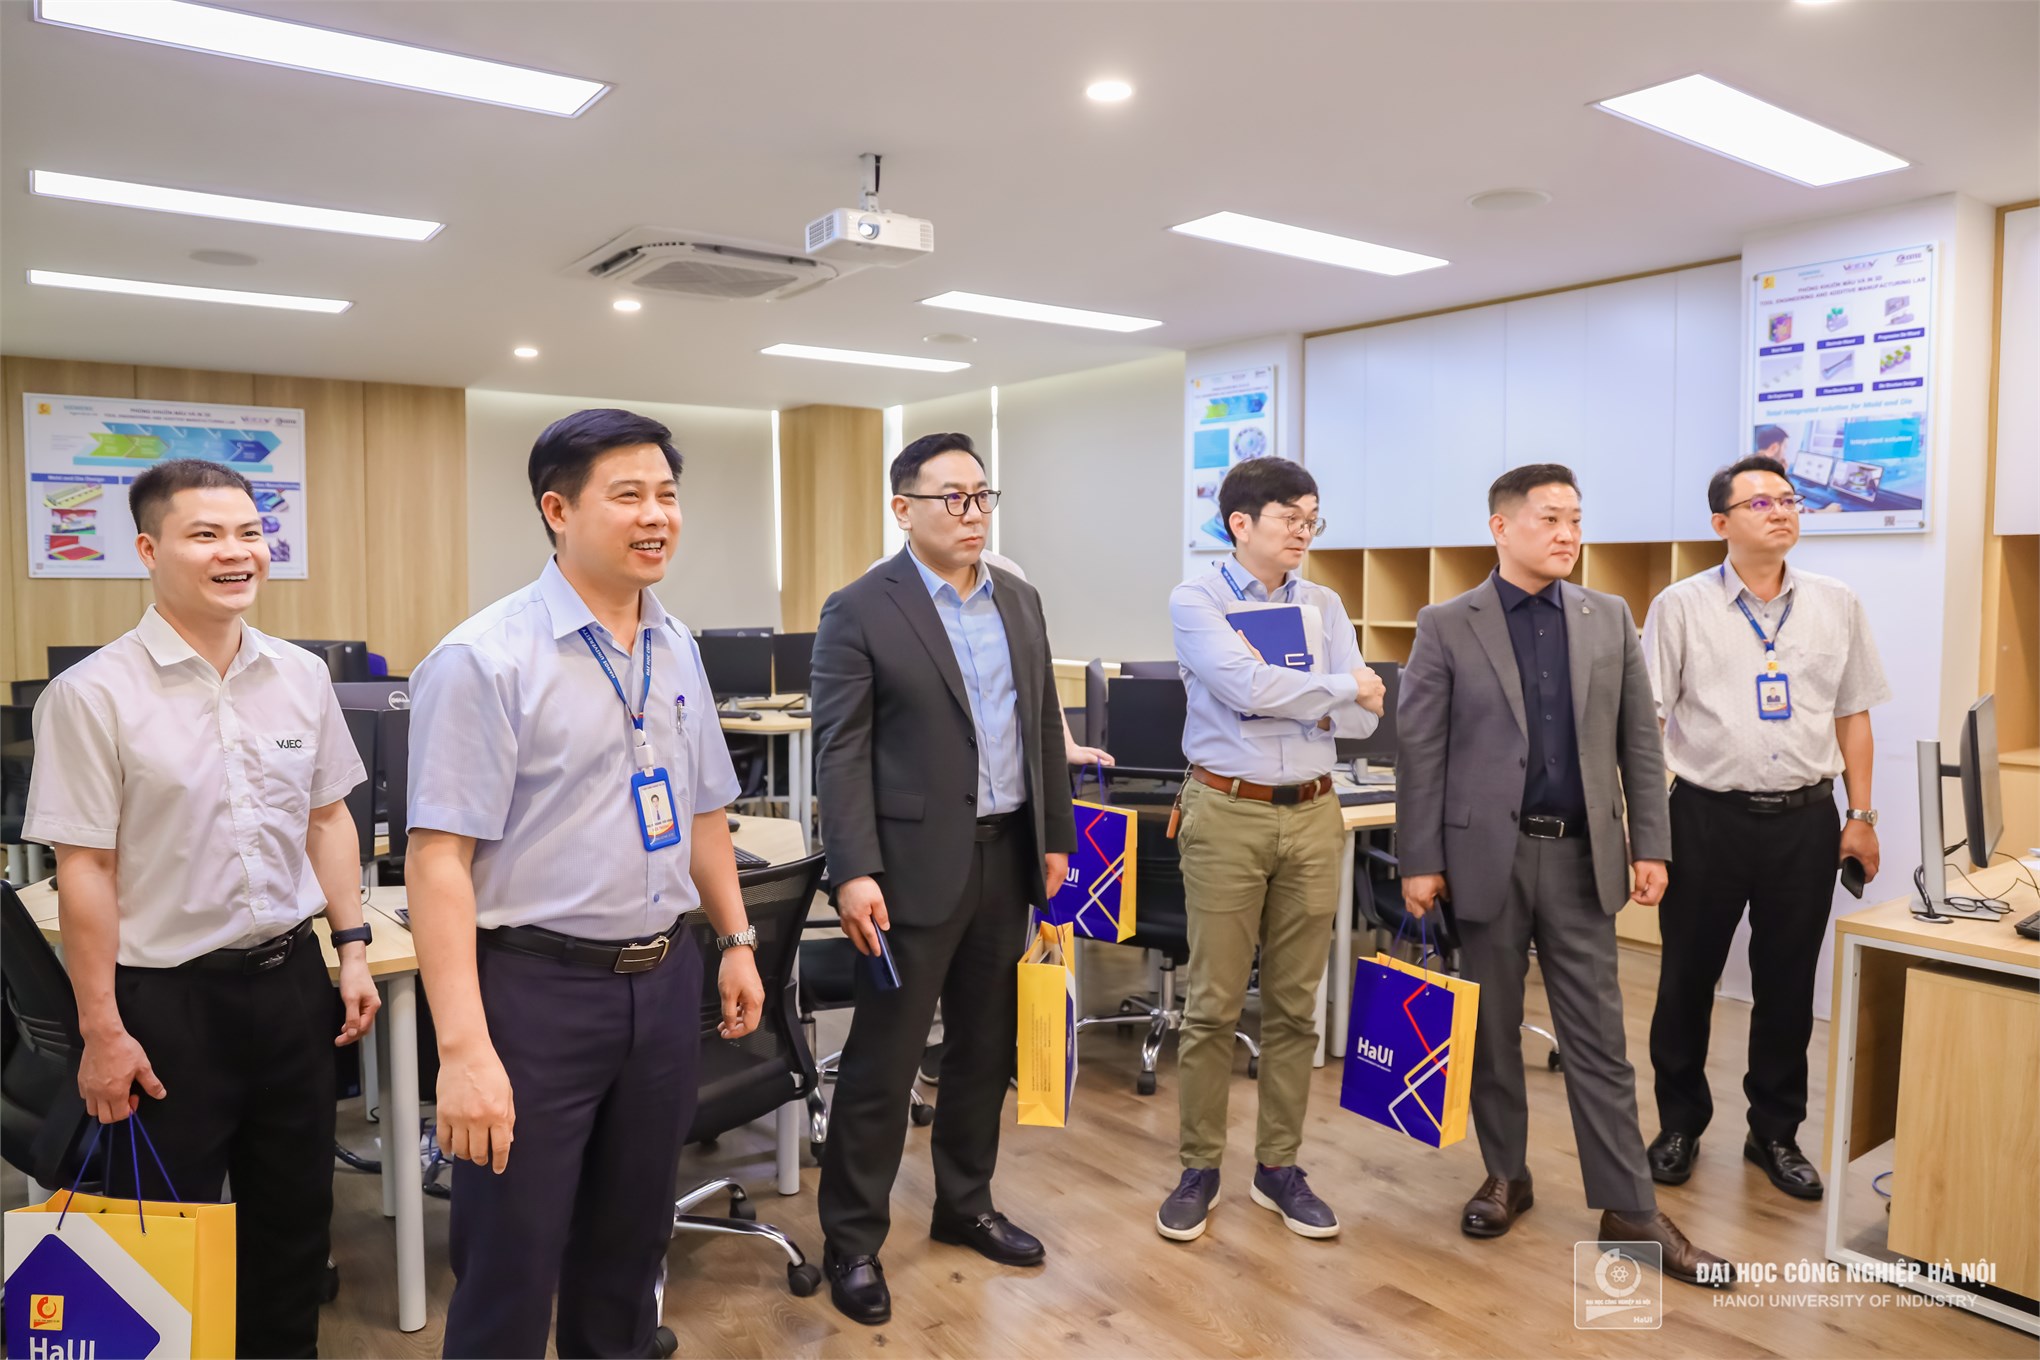 Expanding Job Opportunities in Korea for HaUI Students